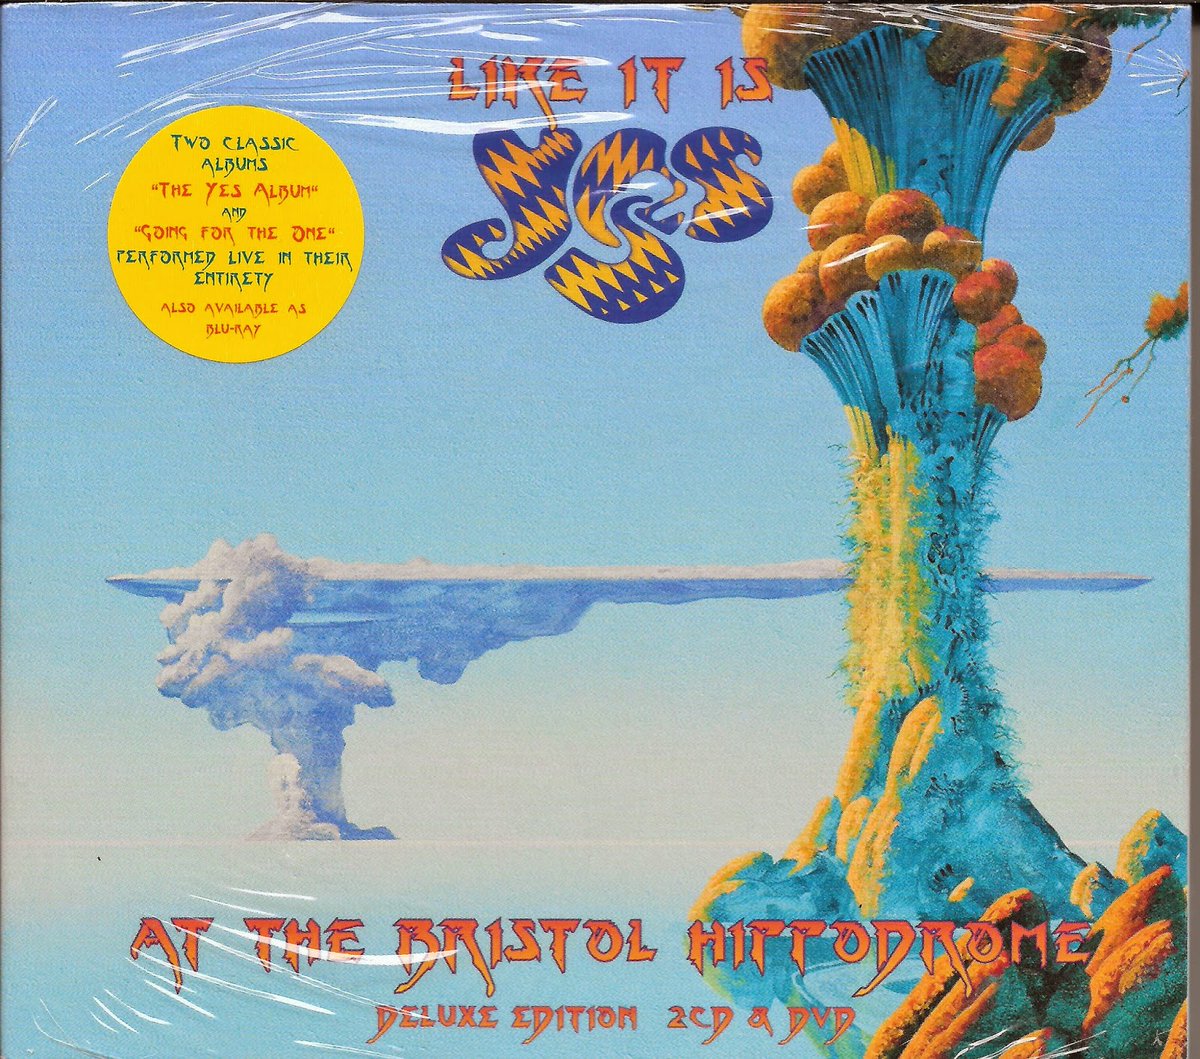 Re-Post

Uncle G’s FUN Music Reviews
Spotlight: Yes – Like It Is_At The Bristol Hippodrome

Uncle G: Live album recorded in 2013. Includes #AlanWhite (drums) and #ChrisSquire (bass). 

#Yes #SteveHowe #GeoffDownes #JonDavison 

garyunclegbrownarchives.com/2021/01/30/unc…